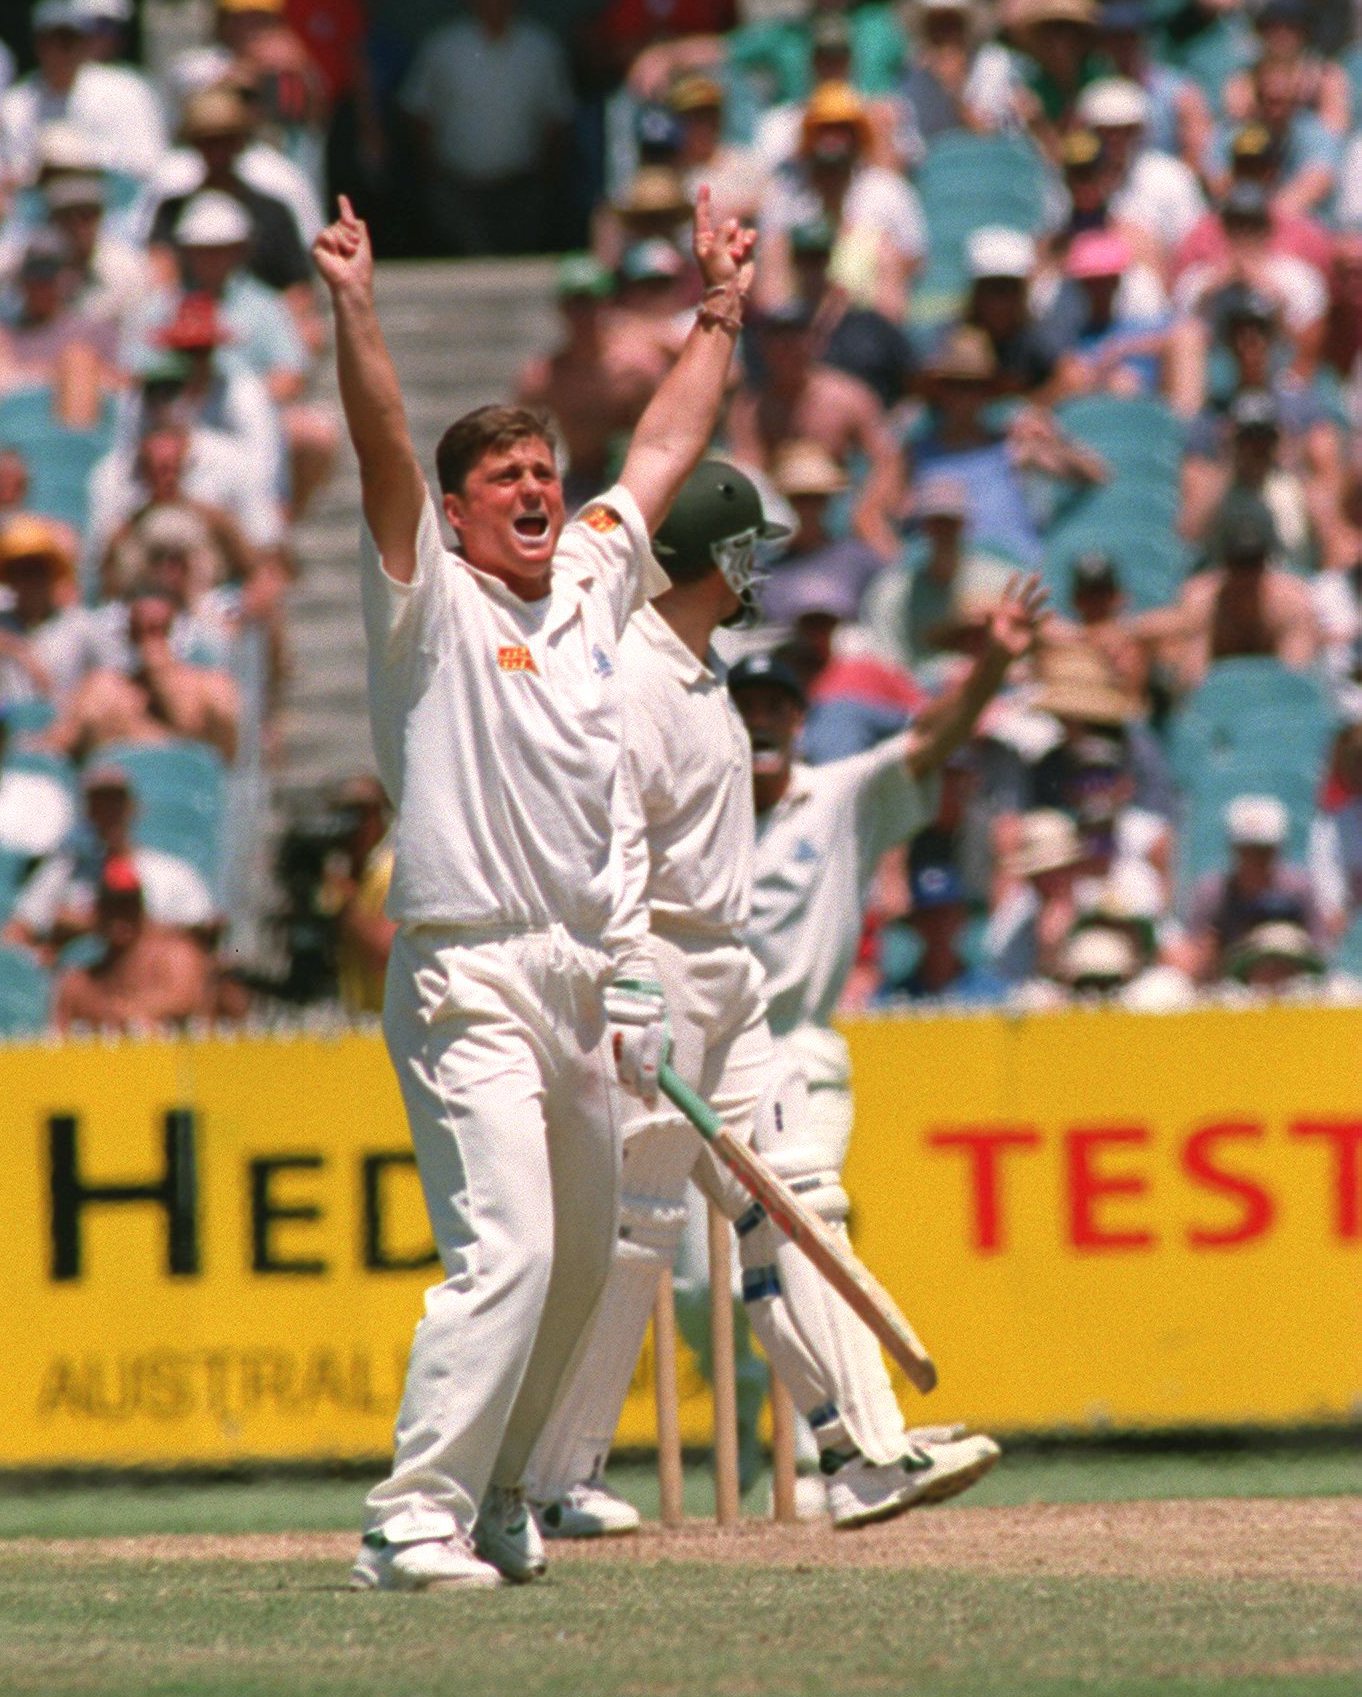 27 DEC 1994: DARREN GOUGH OF ENGLAND CELEBRATES TAKING THE WICKET OF AUSTRALIAN CAPTAIN MARK TAYLOR DURING THE THIRD DAYS PLAY OF THE SECOND TEST MATCH AGAINST AUSTRALIA IN MELBOURNE. Mandatory Credit: Graham Chadwick/ALLSPORT